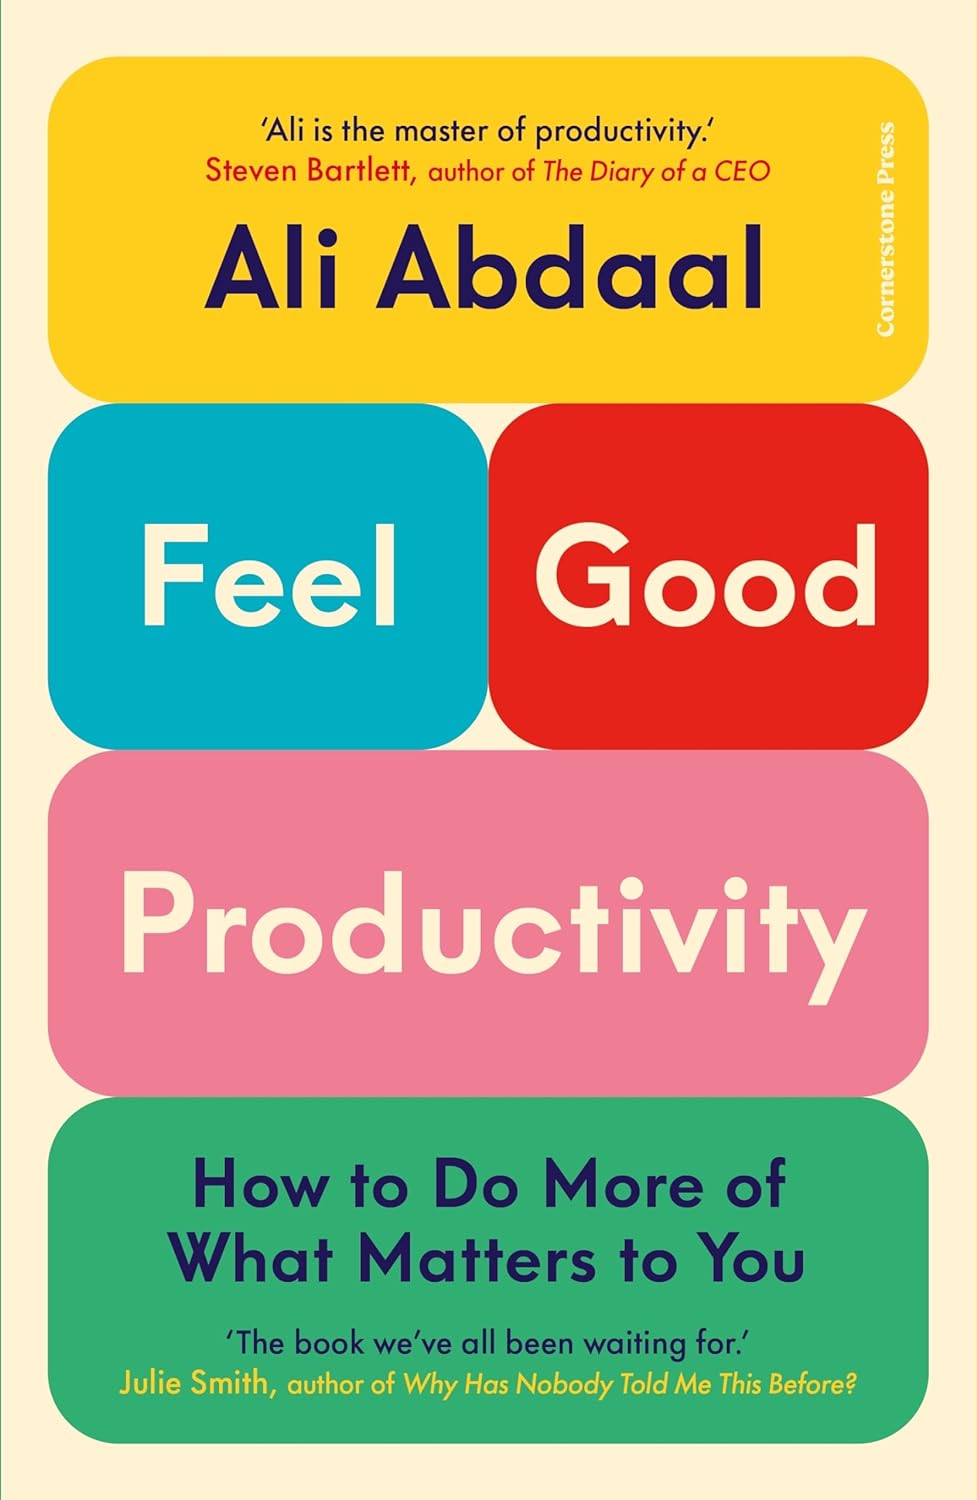 11 Books on How to Improve Your Productivity While Working from Home